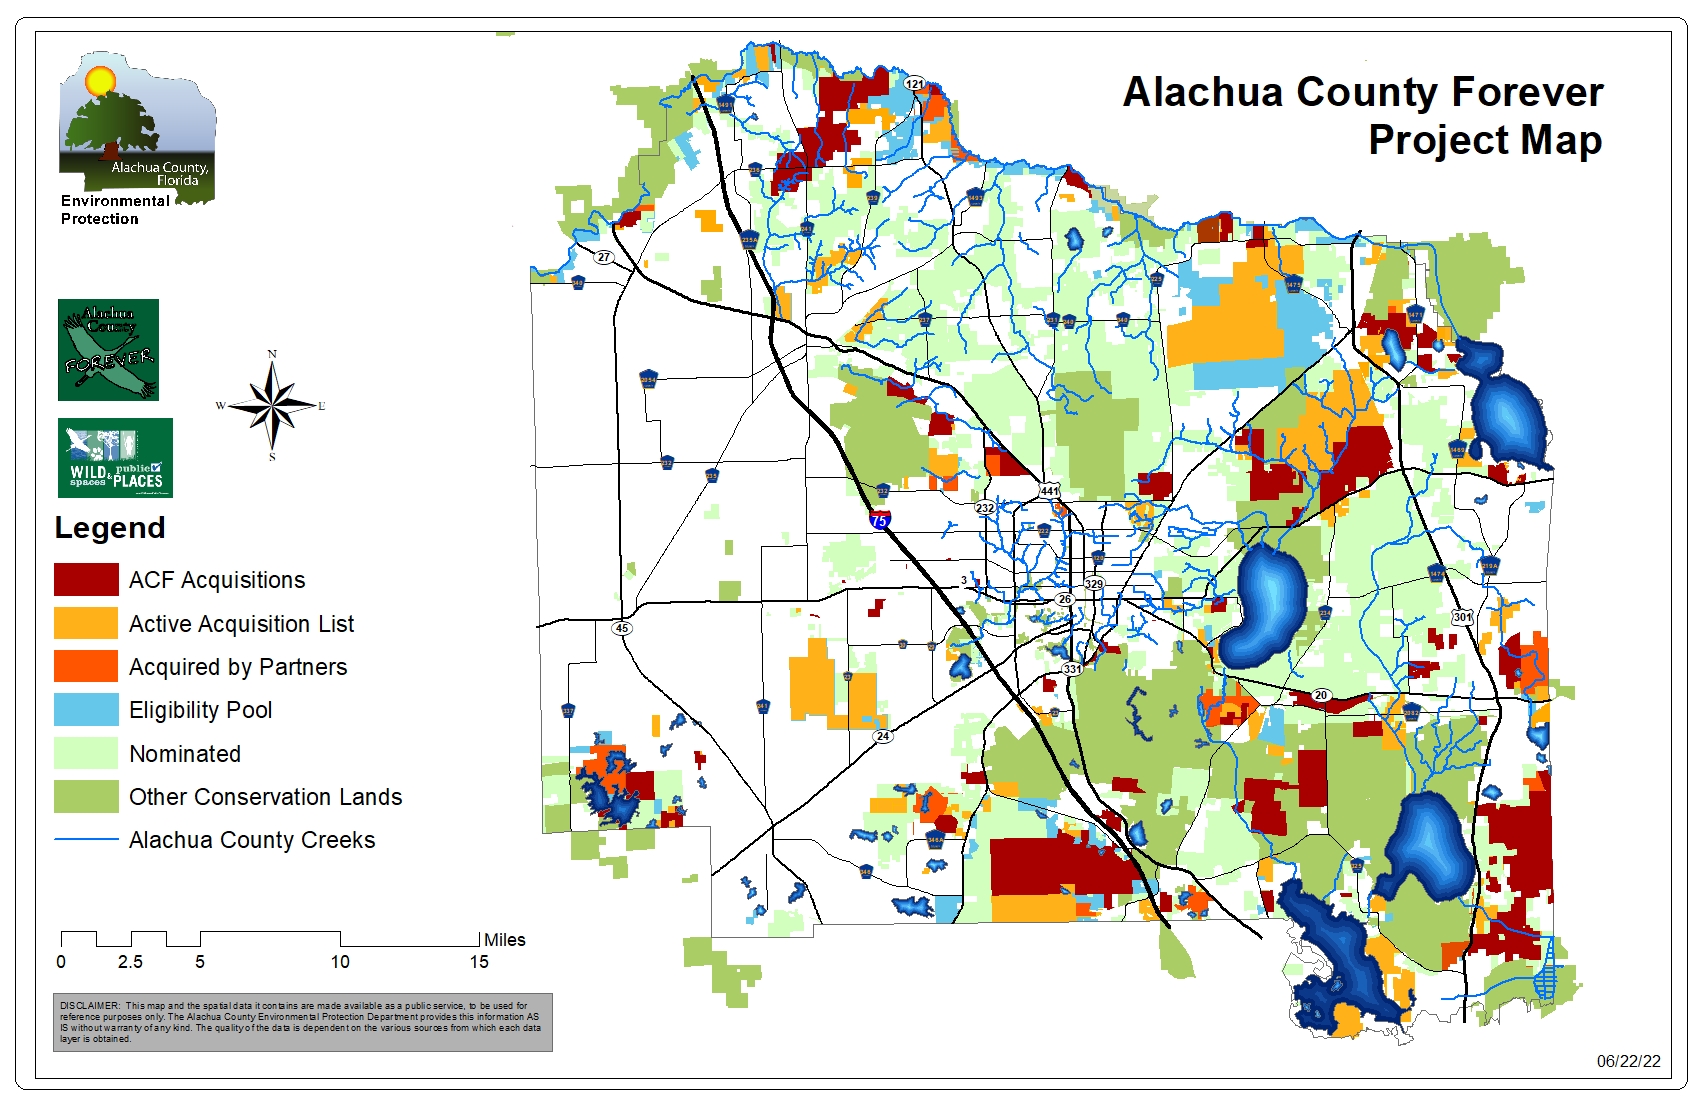 Alachua County Forever Project Map